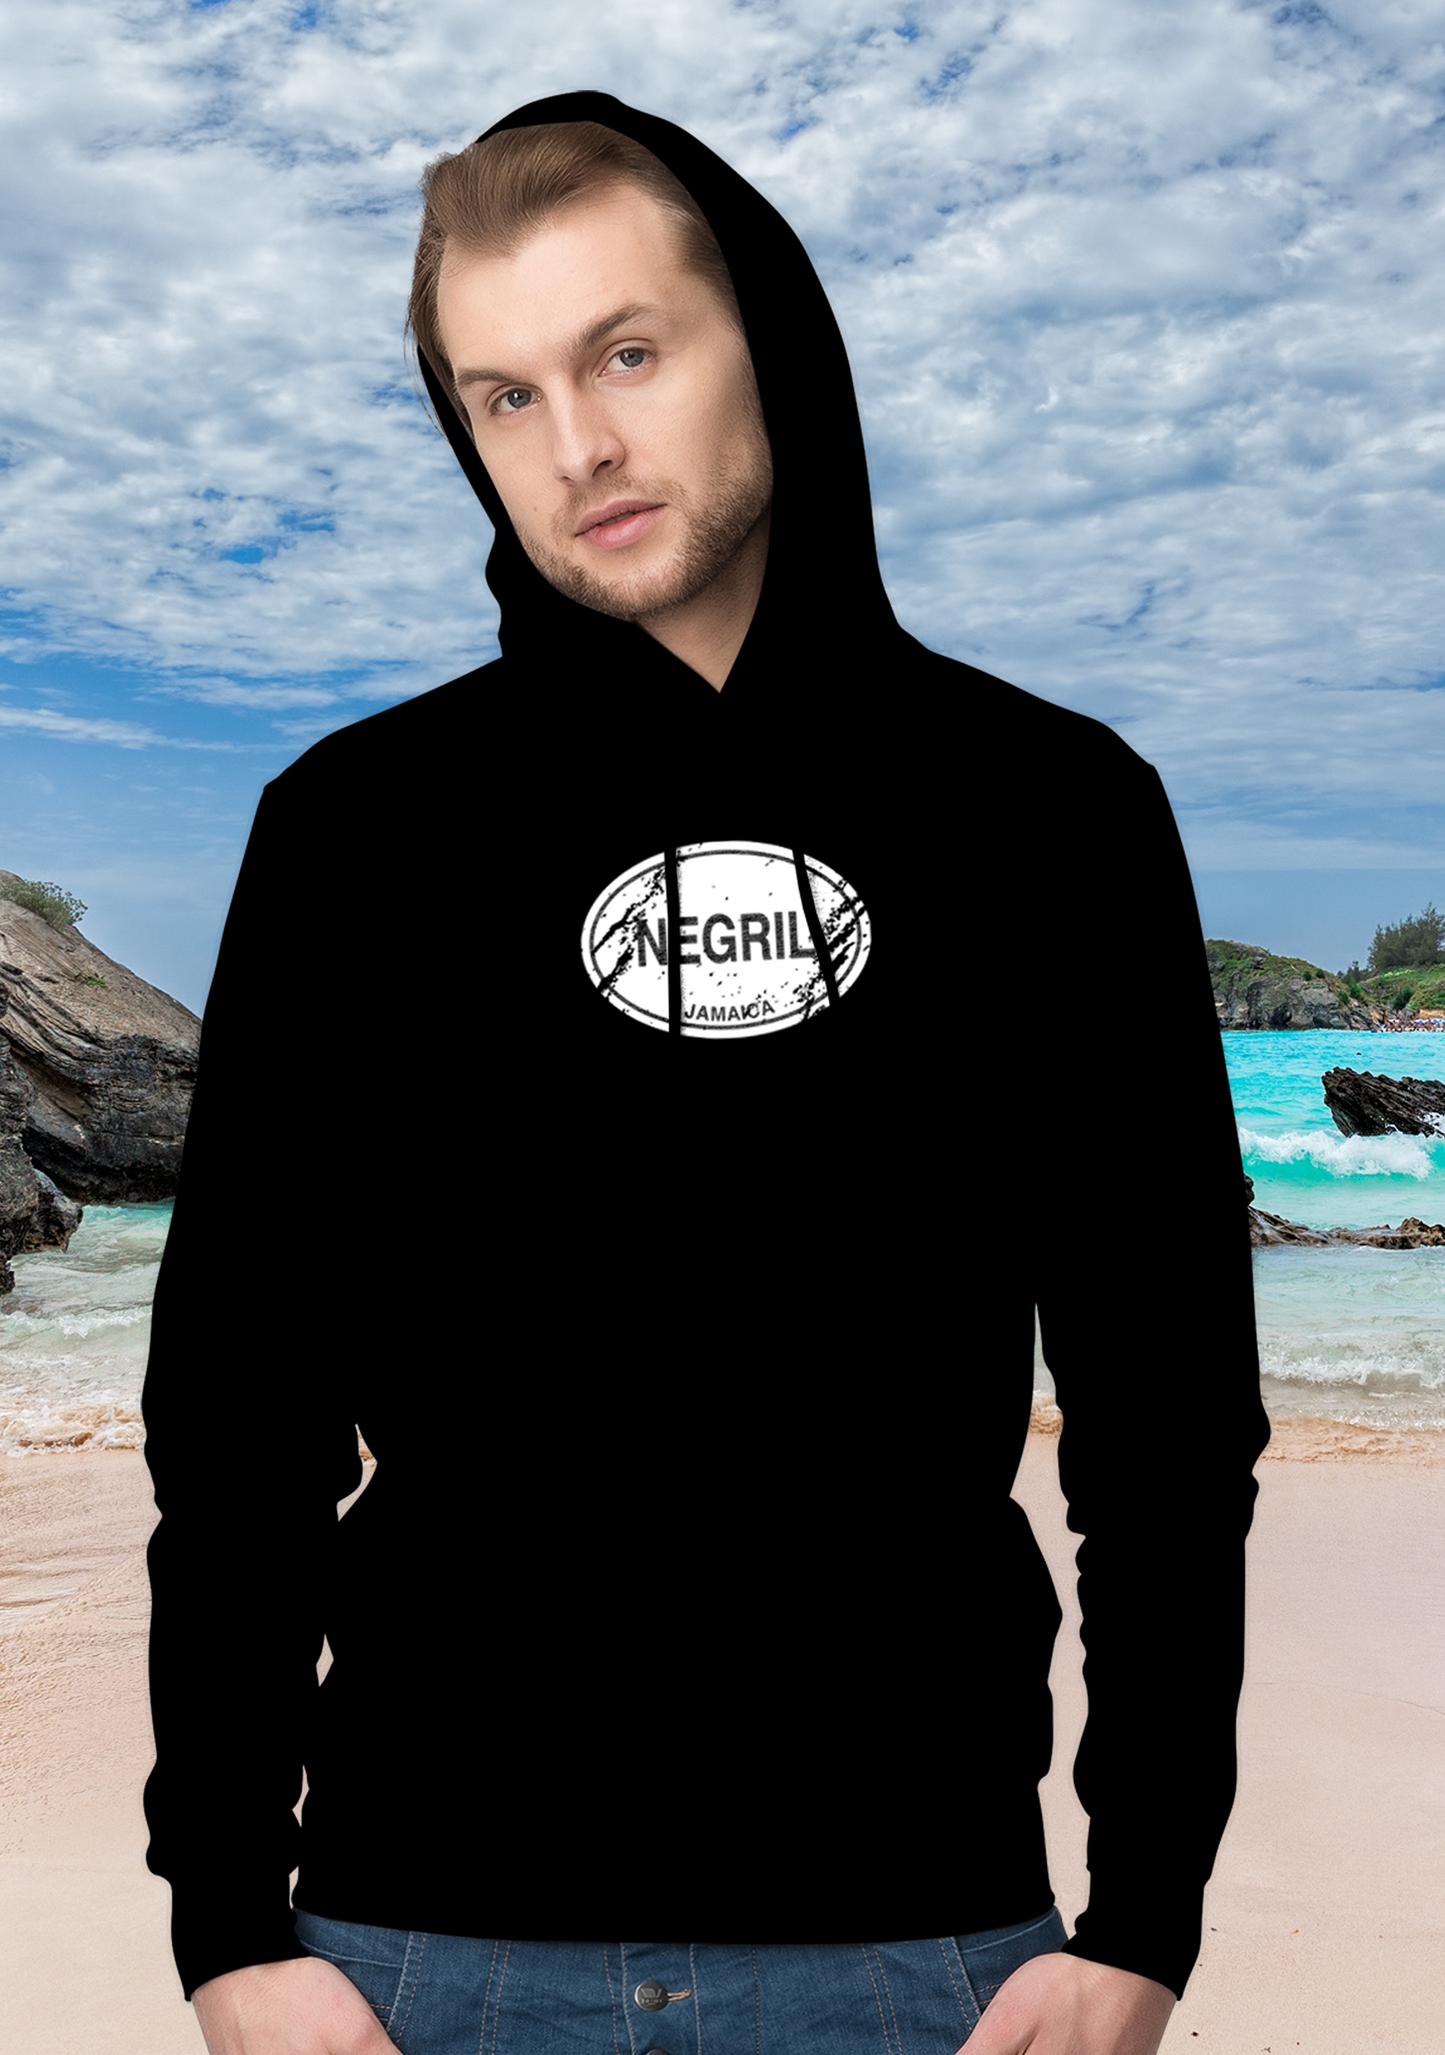 Negril Men's and Women's Classic Adult Hoodie - My Destination Location